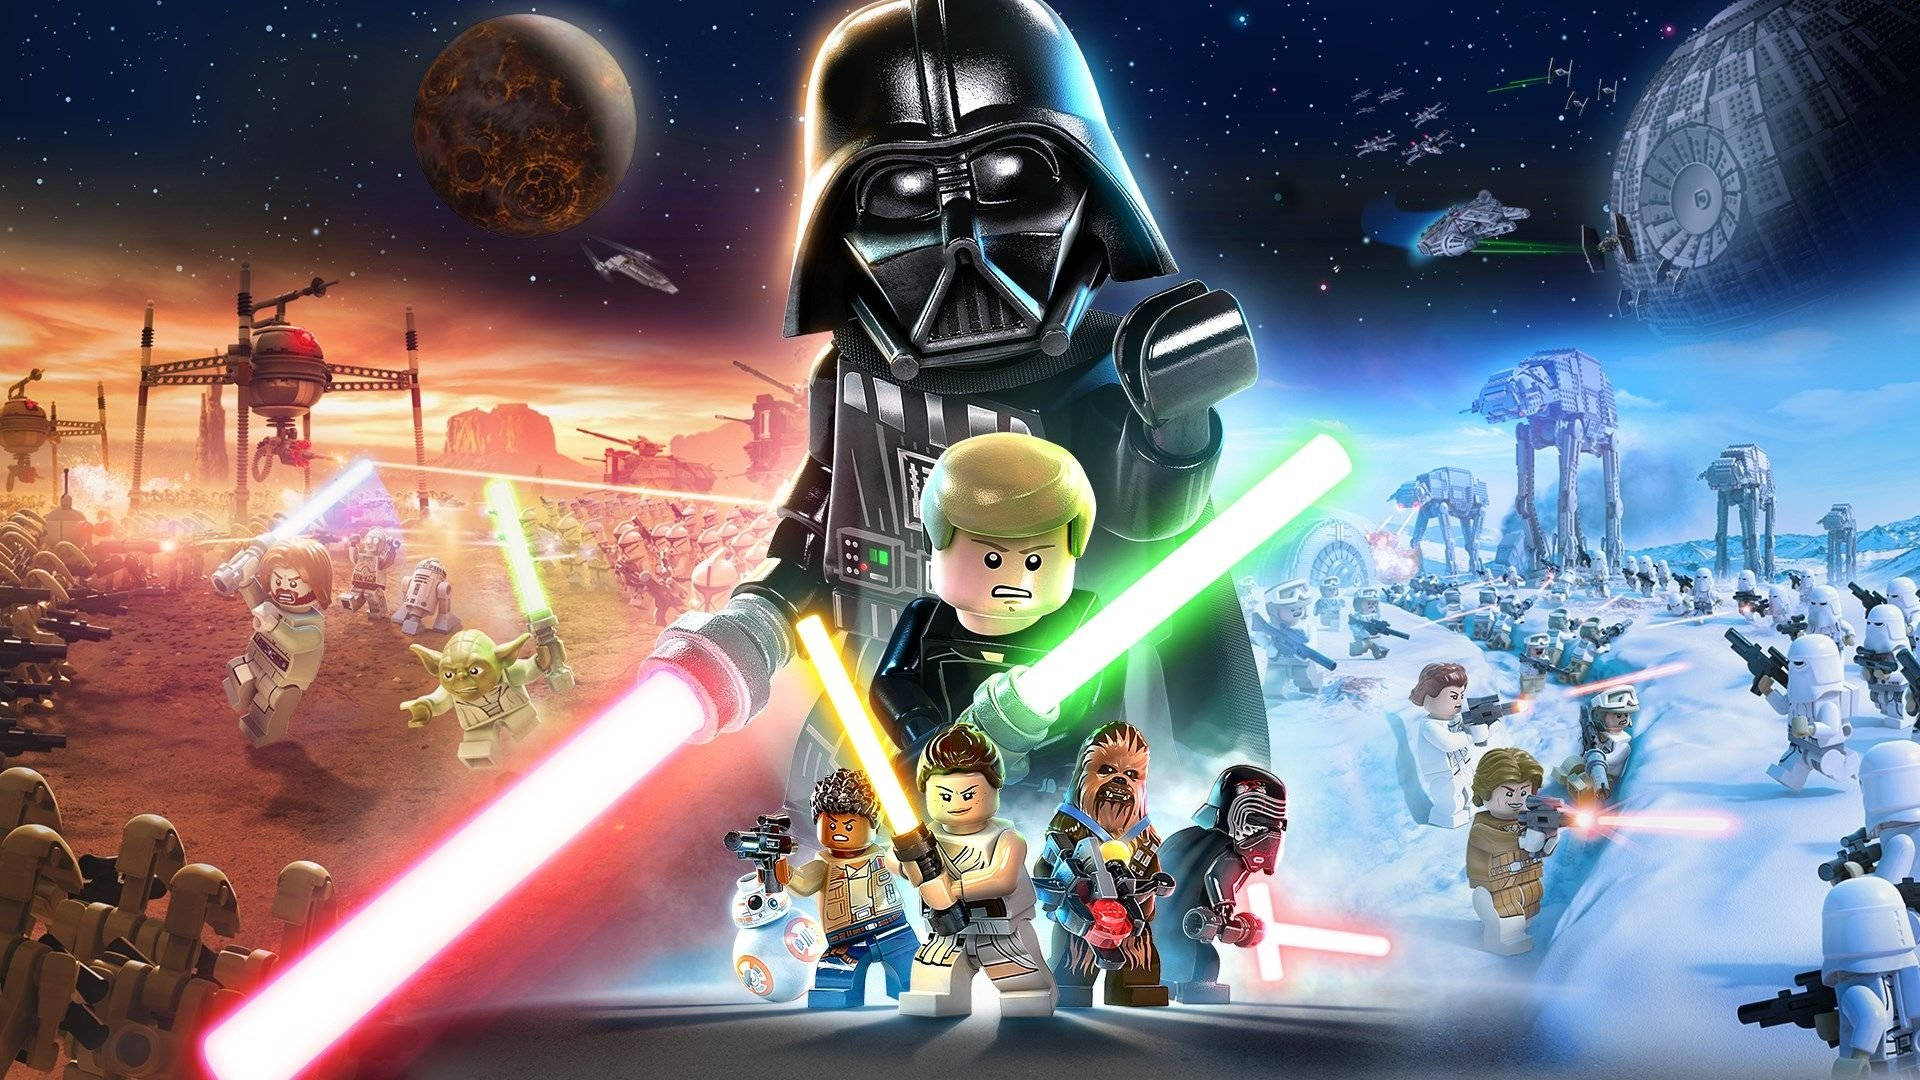 Join Forces with Lego Star Wars Wallpaper